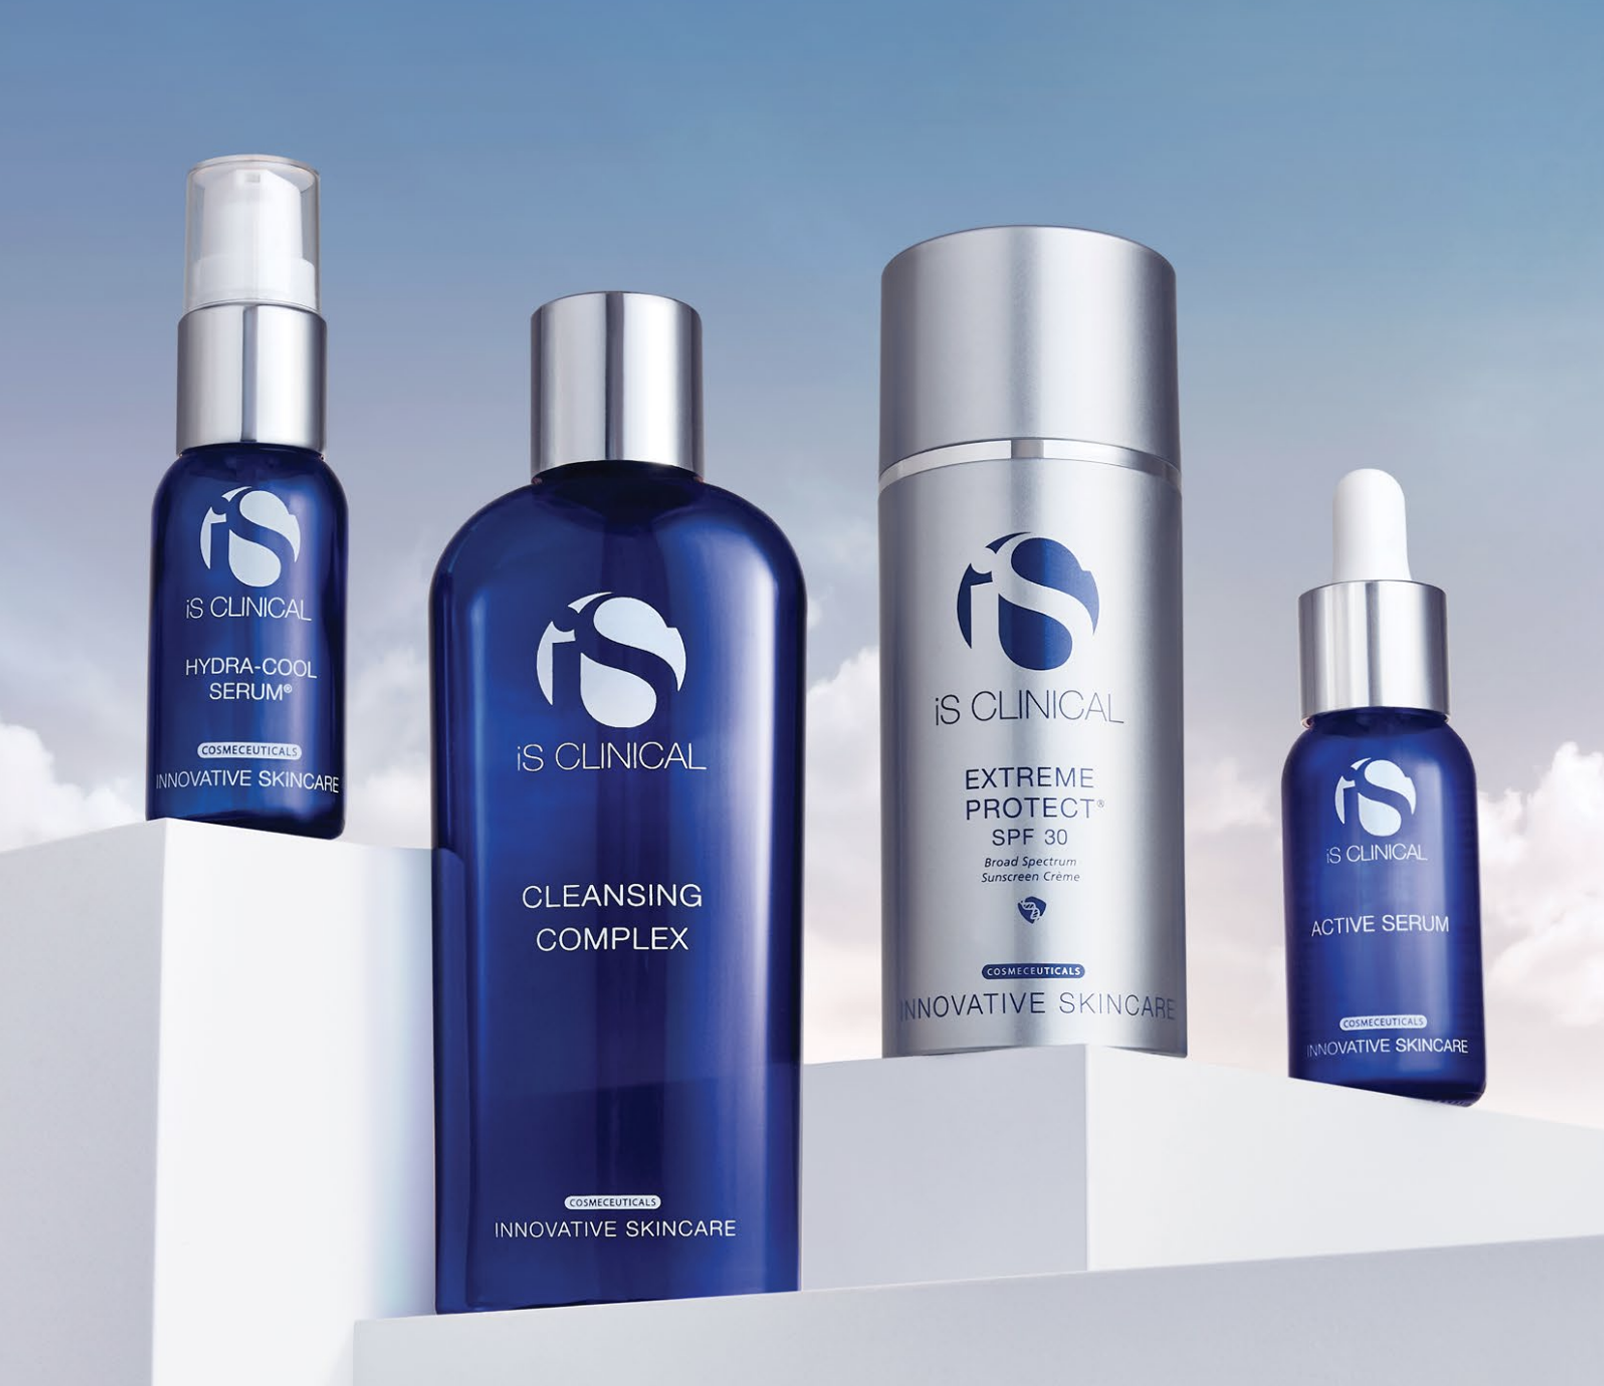 iS Clinical - THE REVOLUTIONARY SKINCARE LINE NOW AVAILABLE AT COSMOPOLITAN CLINIC AMSTERDAM